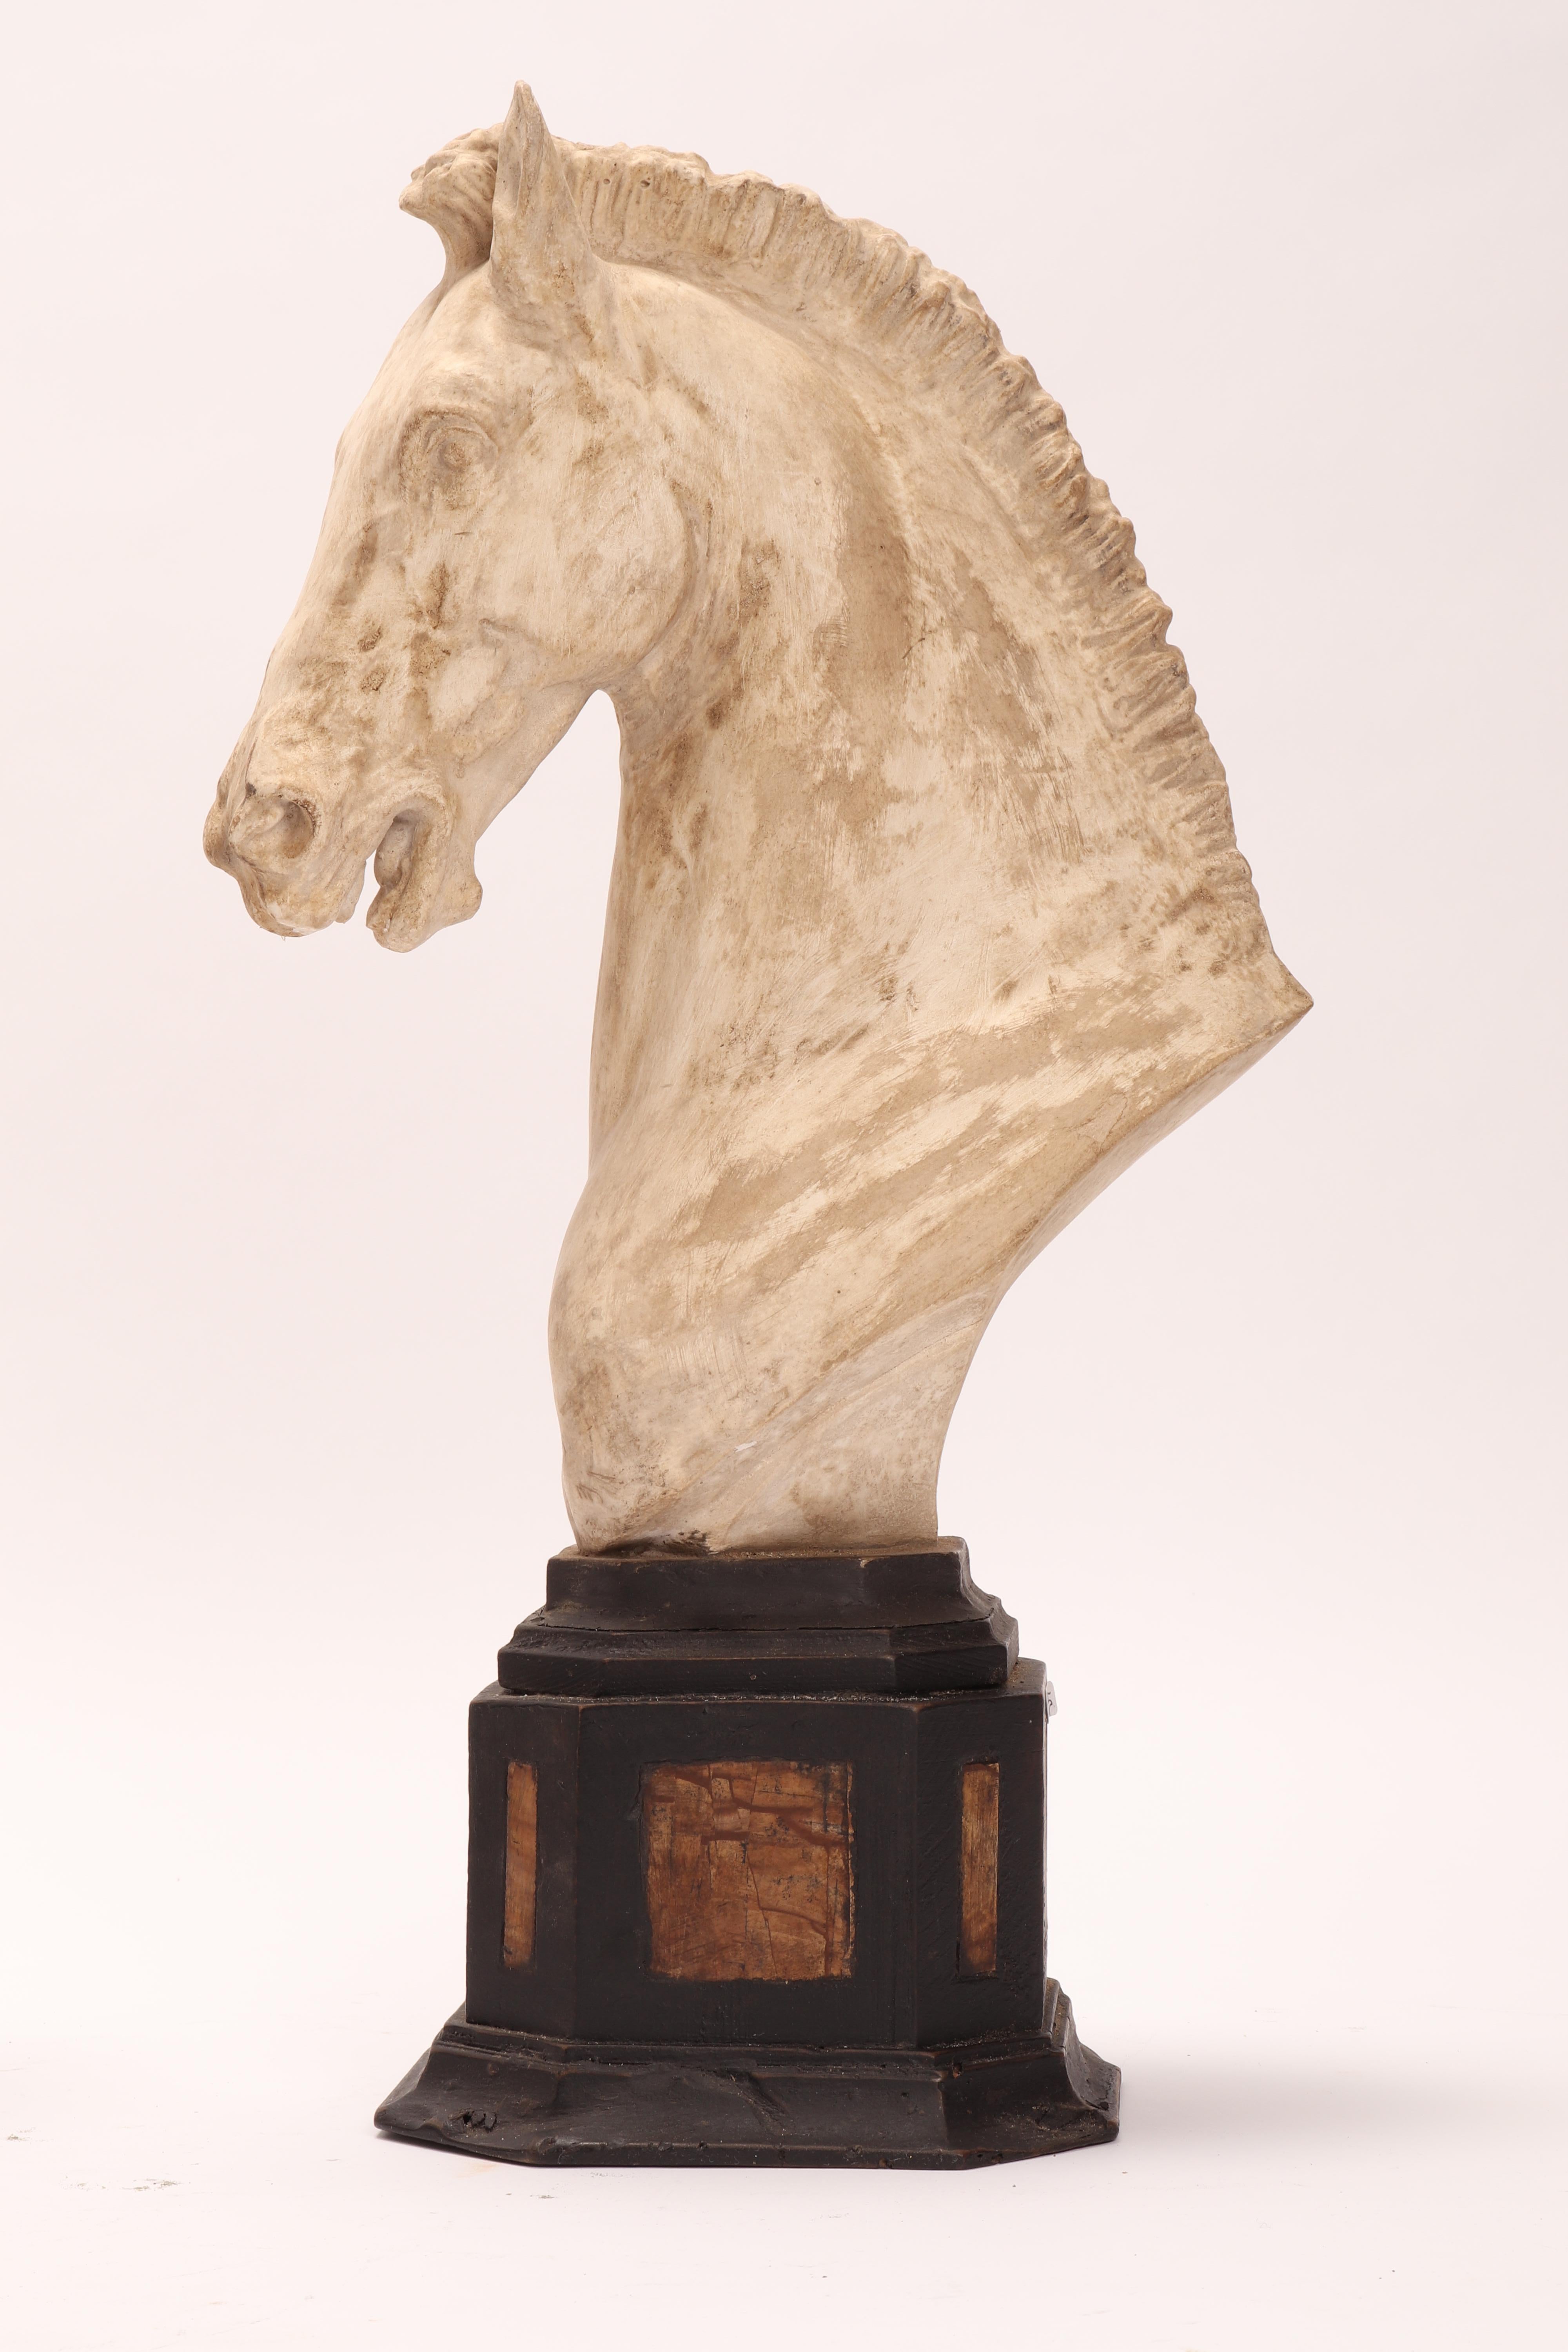 Pair of horse’s heads. Over the octagonal wooden black painted base is set a cast of a horse head. Along the sides of the plinth base, there are 8 Paesina stone (figured stones) slabs. The cast for drawing teaching in Academy. Italy, circa 1870.